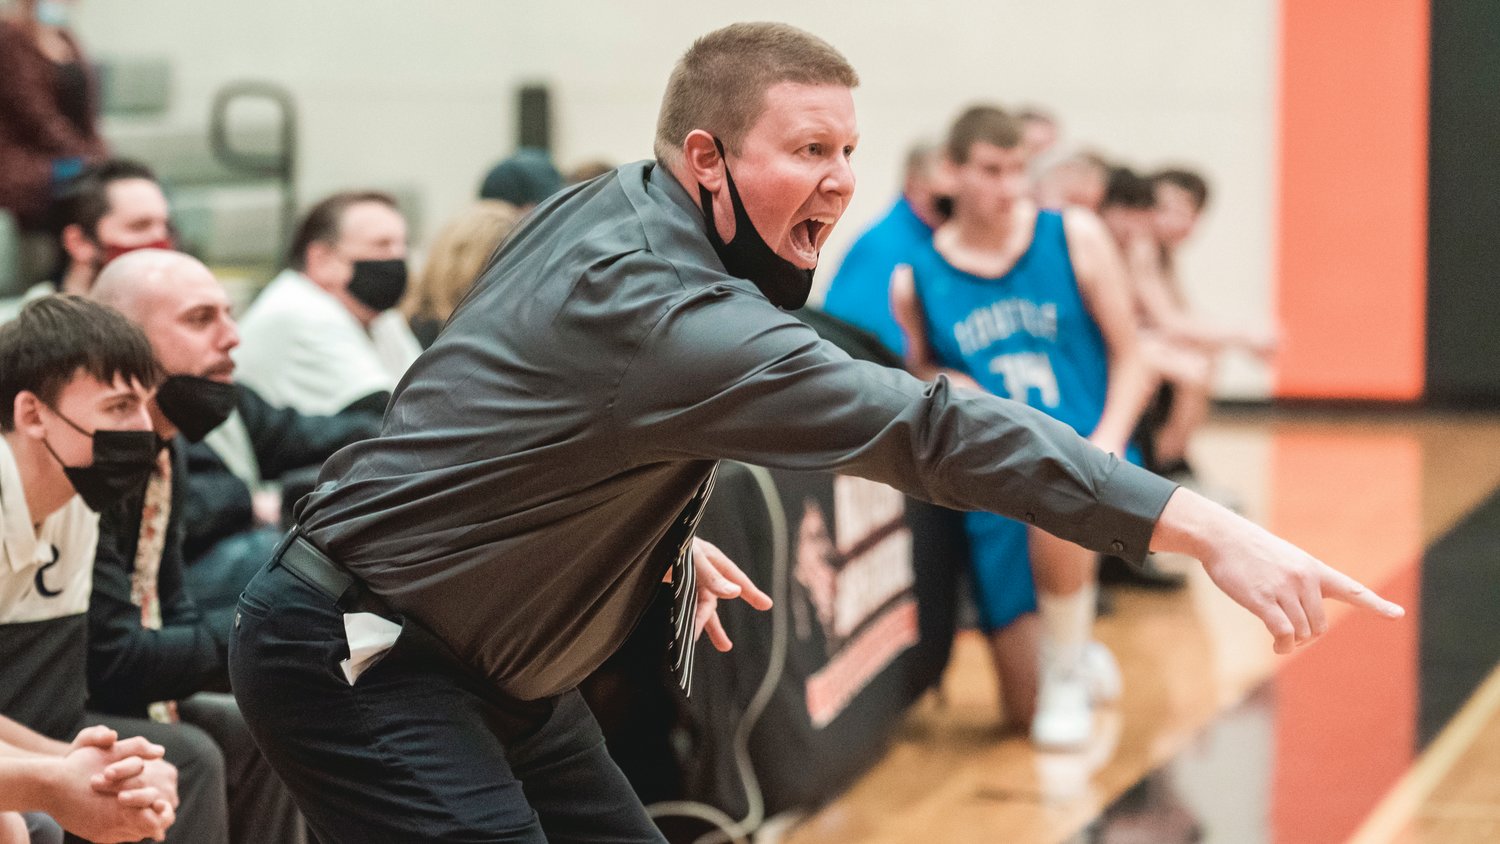 Rainier Head Coach Ben Sheaffer yells to players on the court during a game against Toutle Thursday night.